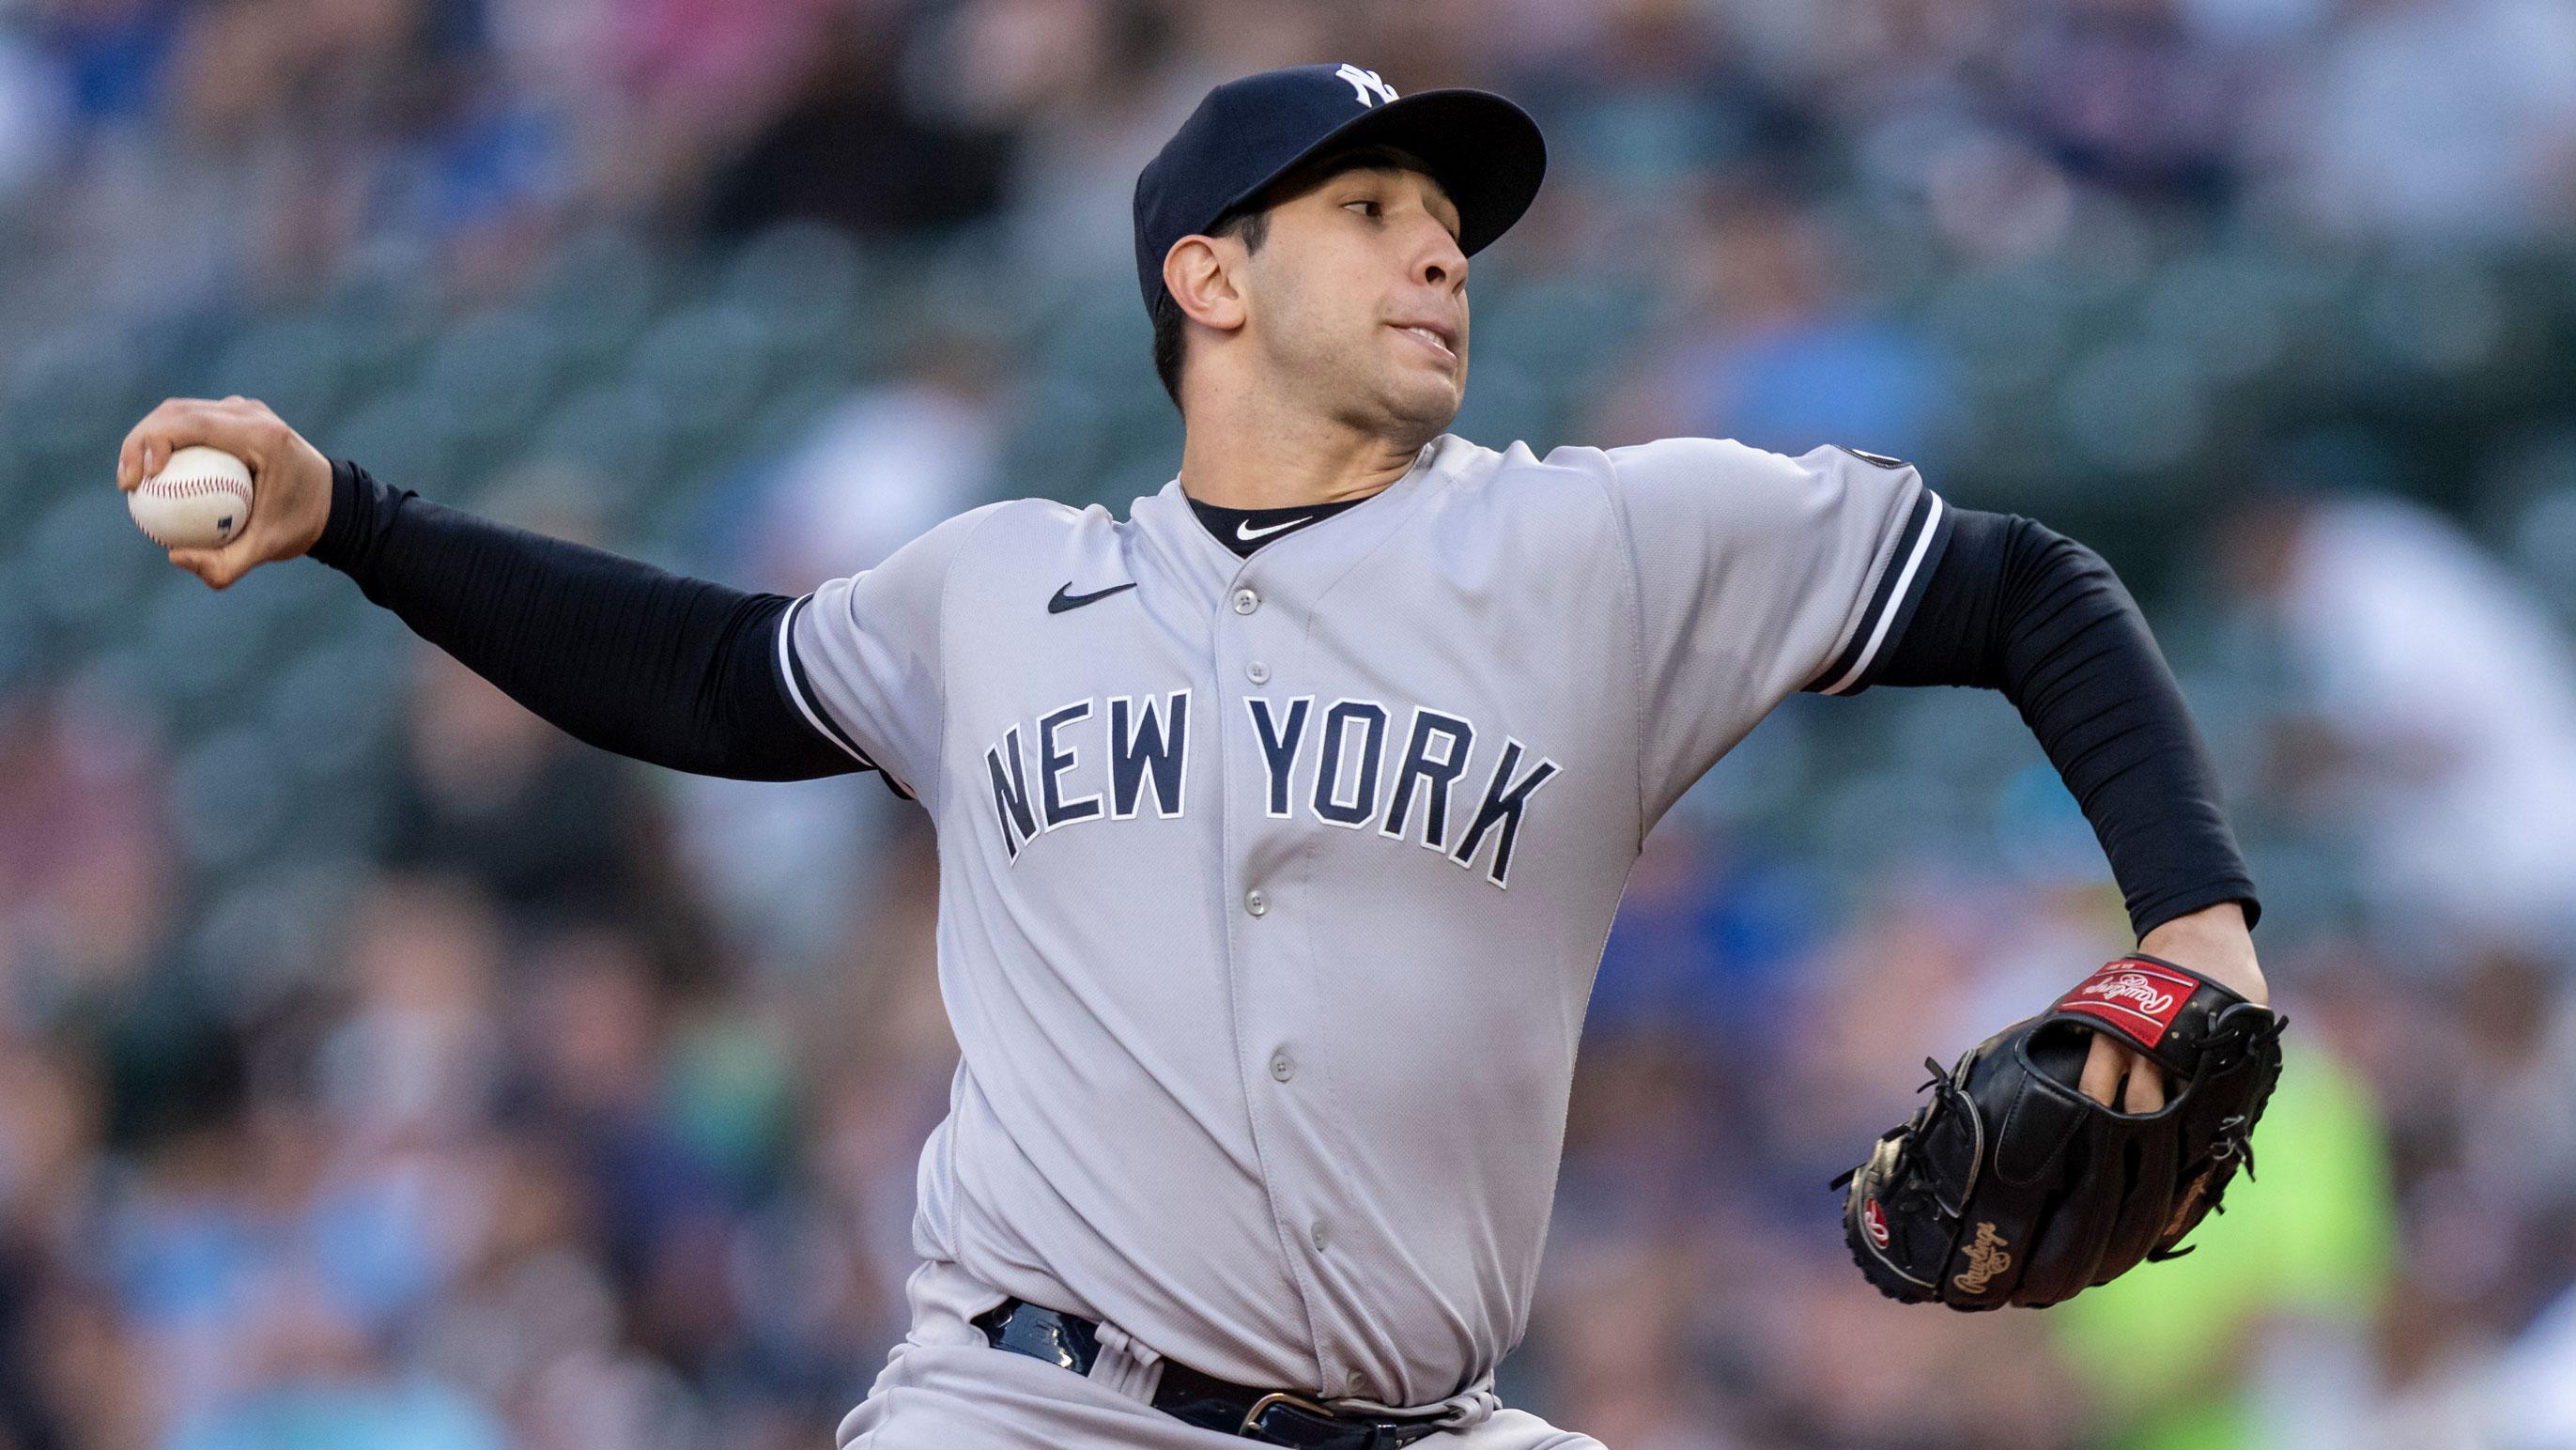 Jul 7, 2021; Seattle, Washington, USA; New York Yankees reliever Luis Cessa (85) delivers a pitch during a game against the Seattle Mariners at T-Mobile Park. The Yankees won 5-4. / Stephen Brashear-USA TODAY Sports